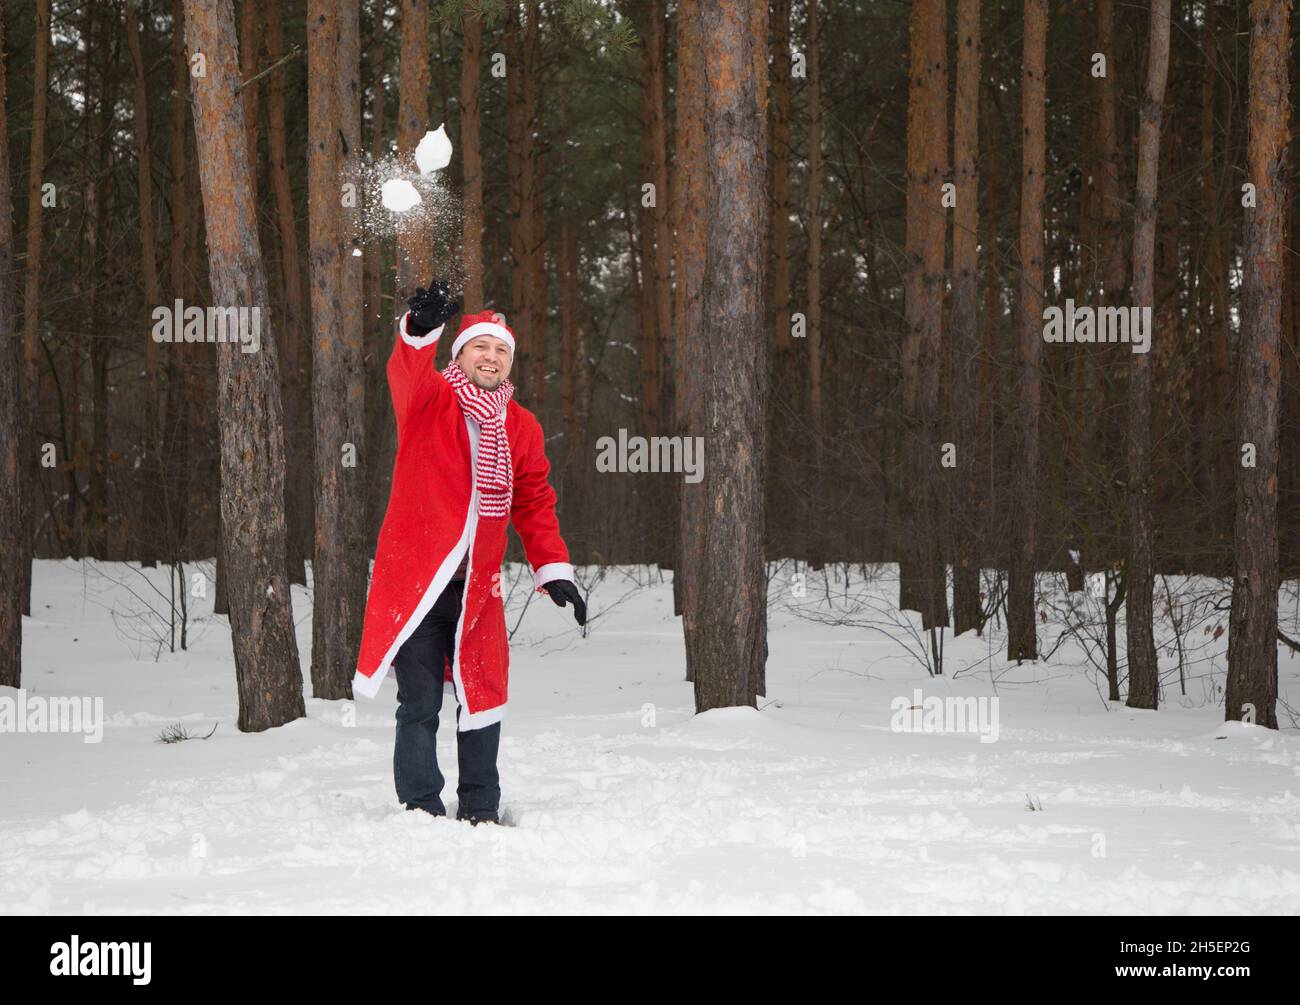 cheerful man in a Santa suit throws snowballs in a snowy forest. Christmas Eve, merry snowy winter. Waiting for a miracle, winter joys Stock Photo